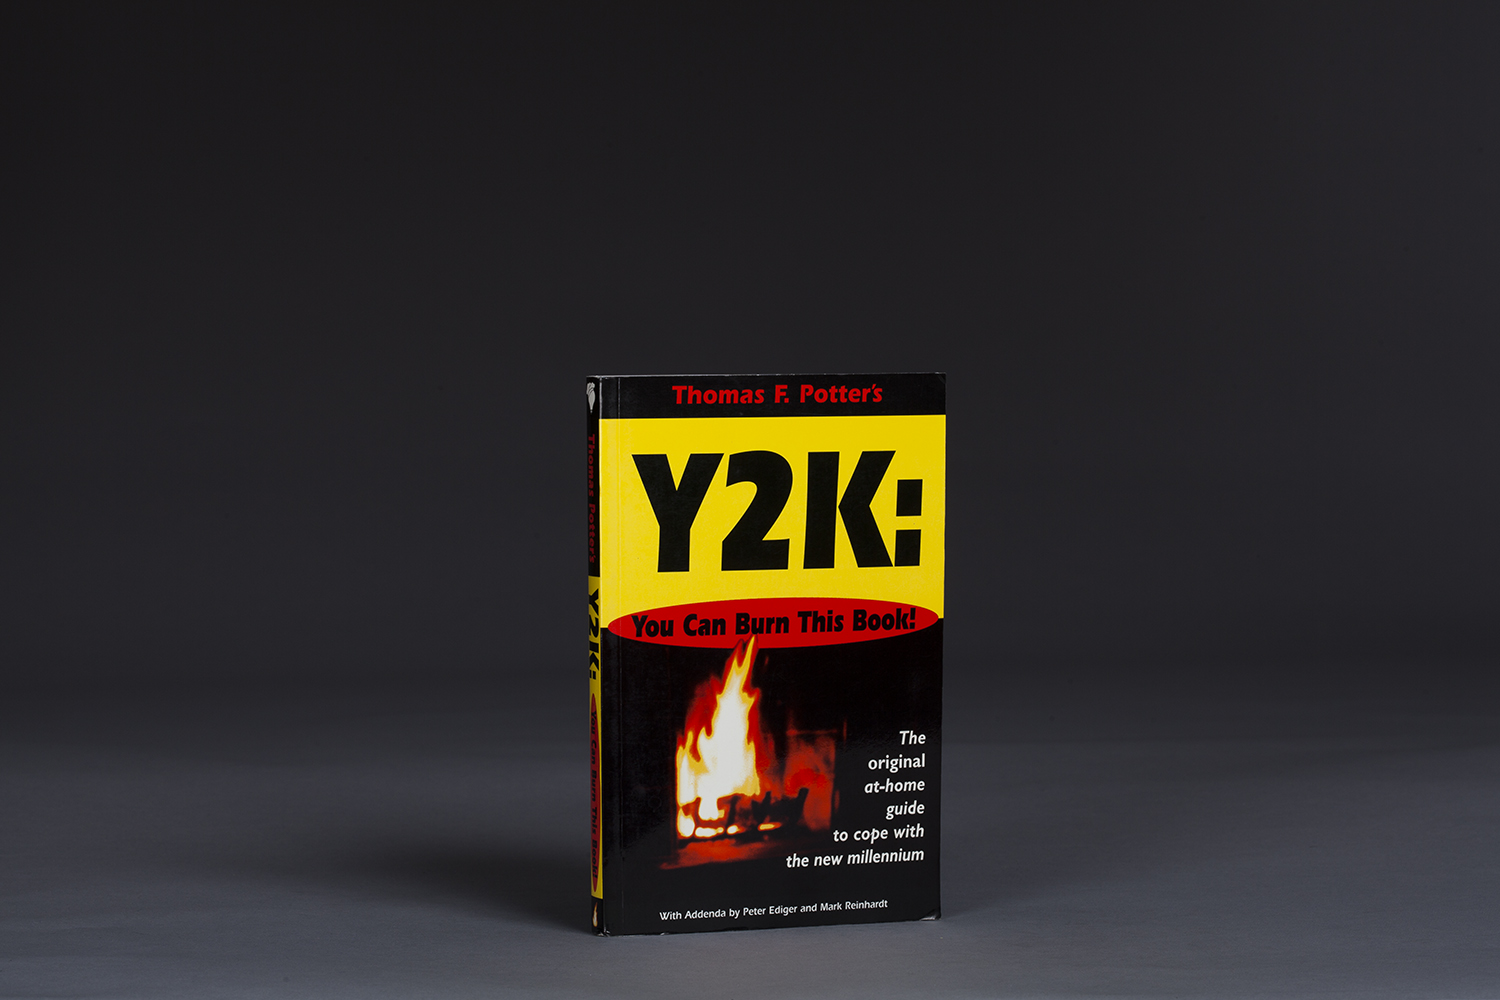 Y2K - You Can Burn This Book! - 0250 Cover.jpg